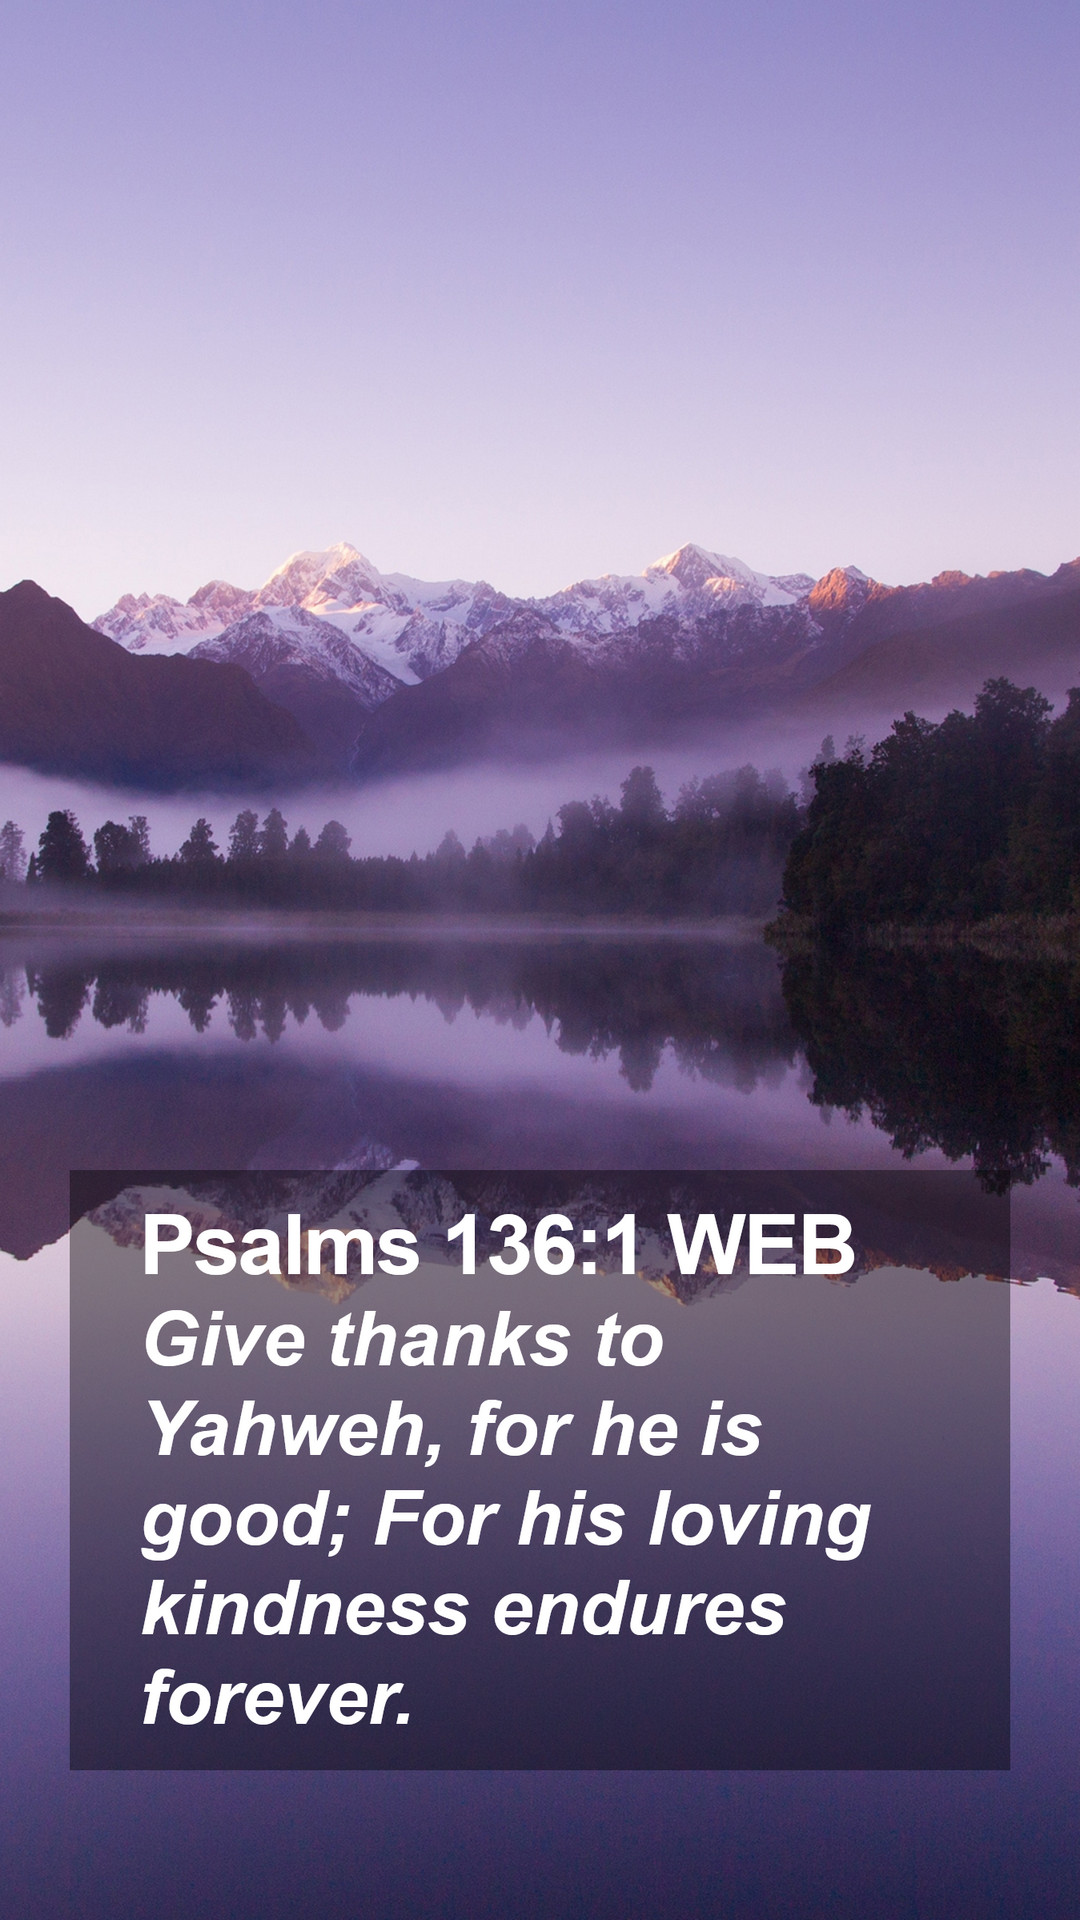 Psalms 136:1 WEB Mobile Phone Wallpaper thanks to Yahweh, for he is good; For his